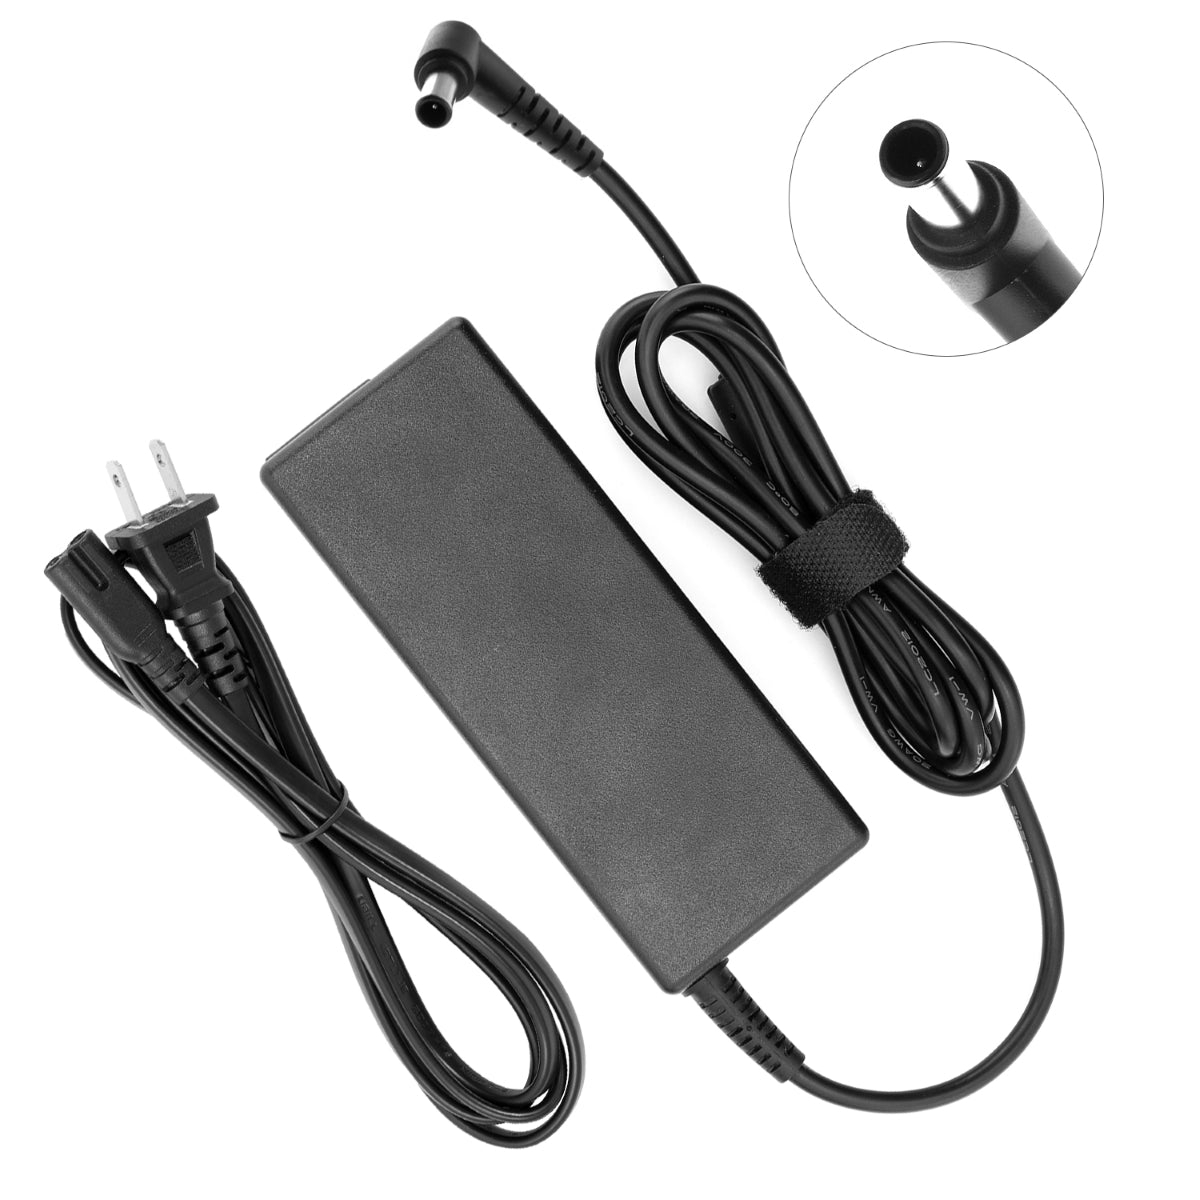 Compatible Charger for Sony Vaio VGN-FZ240E